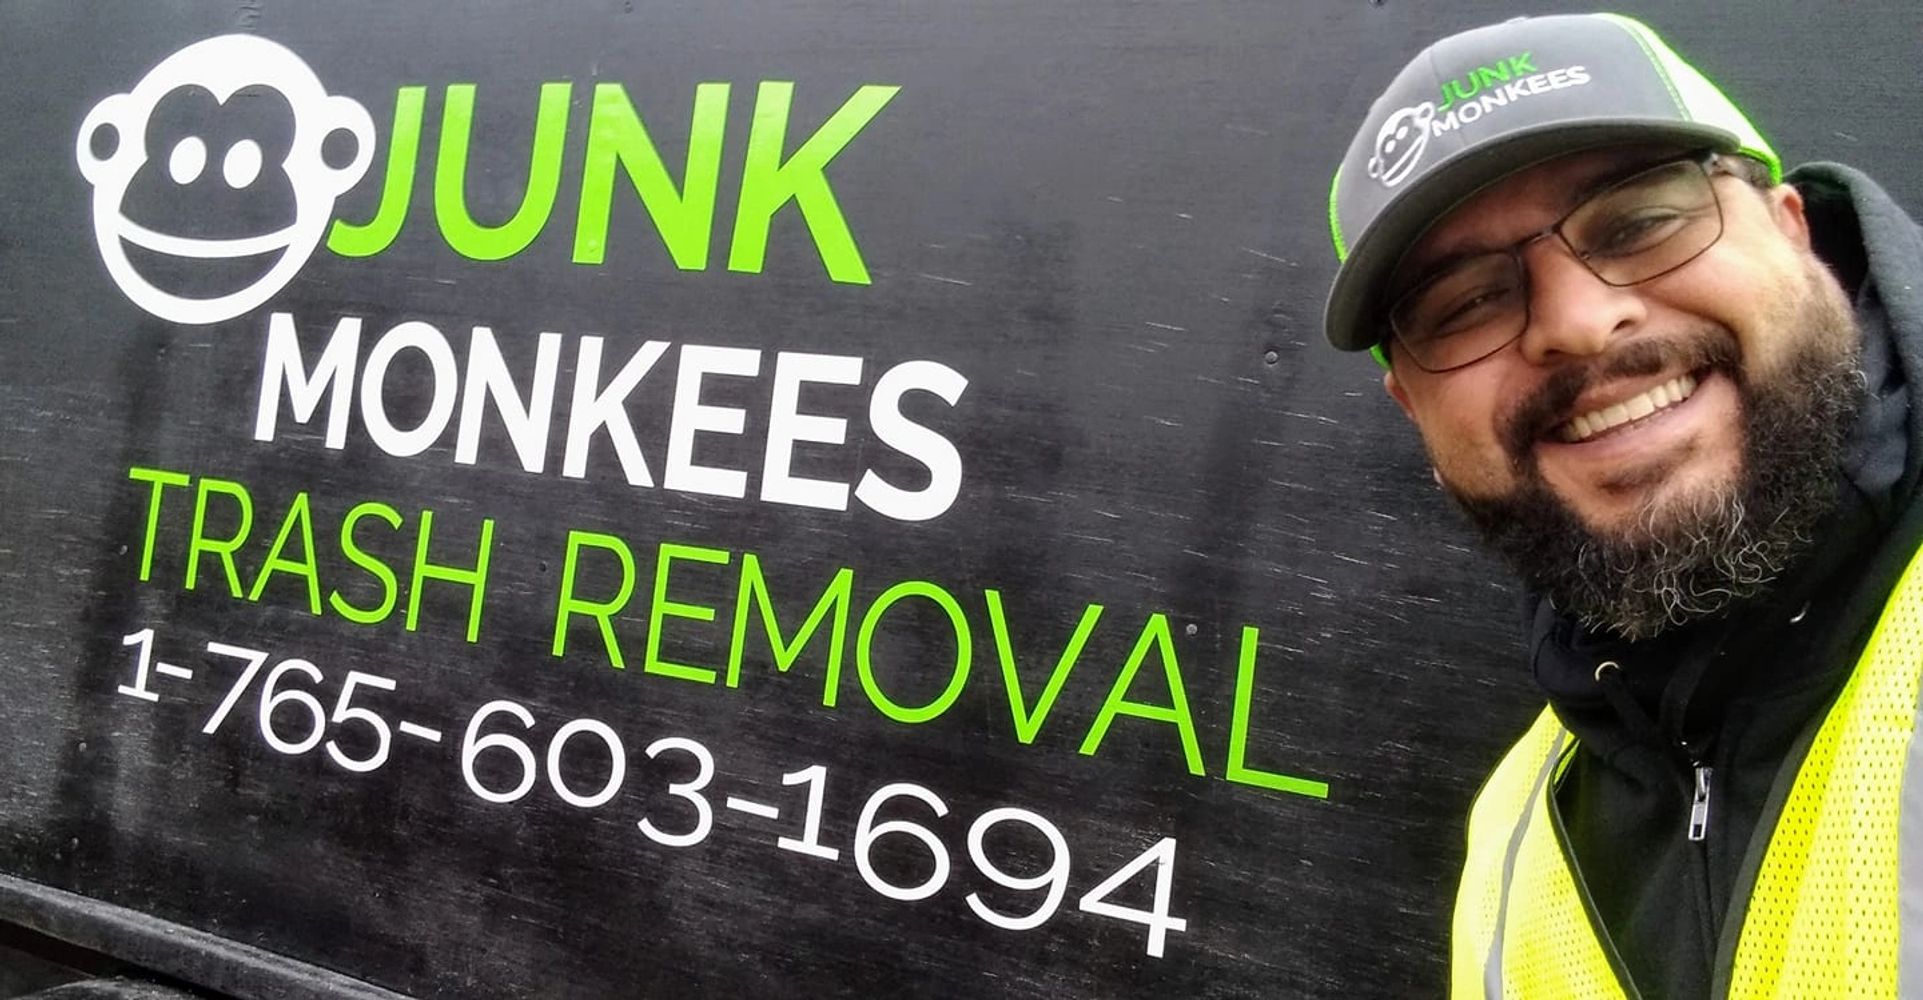 Junk Monkees trash removal owner smiling next to company logo in Marion Indiana.